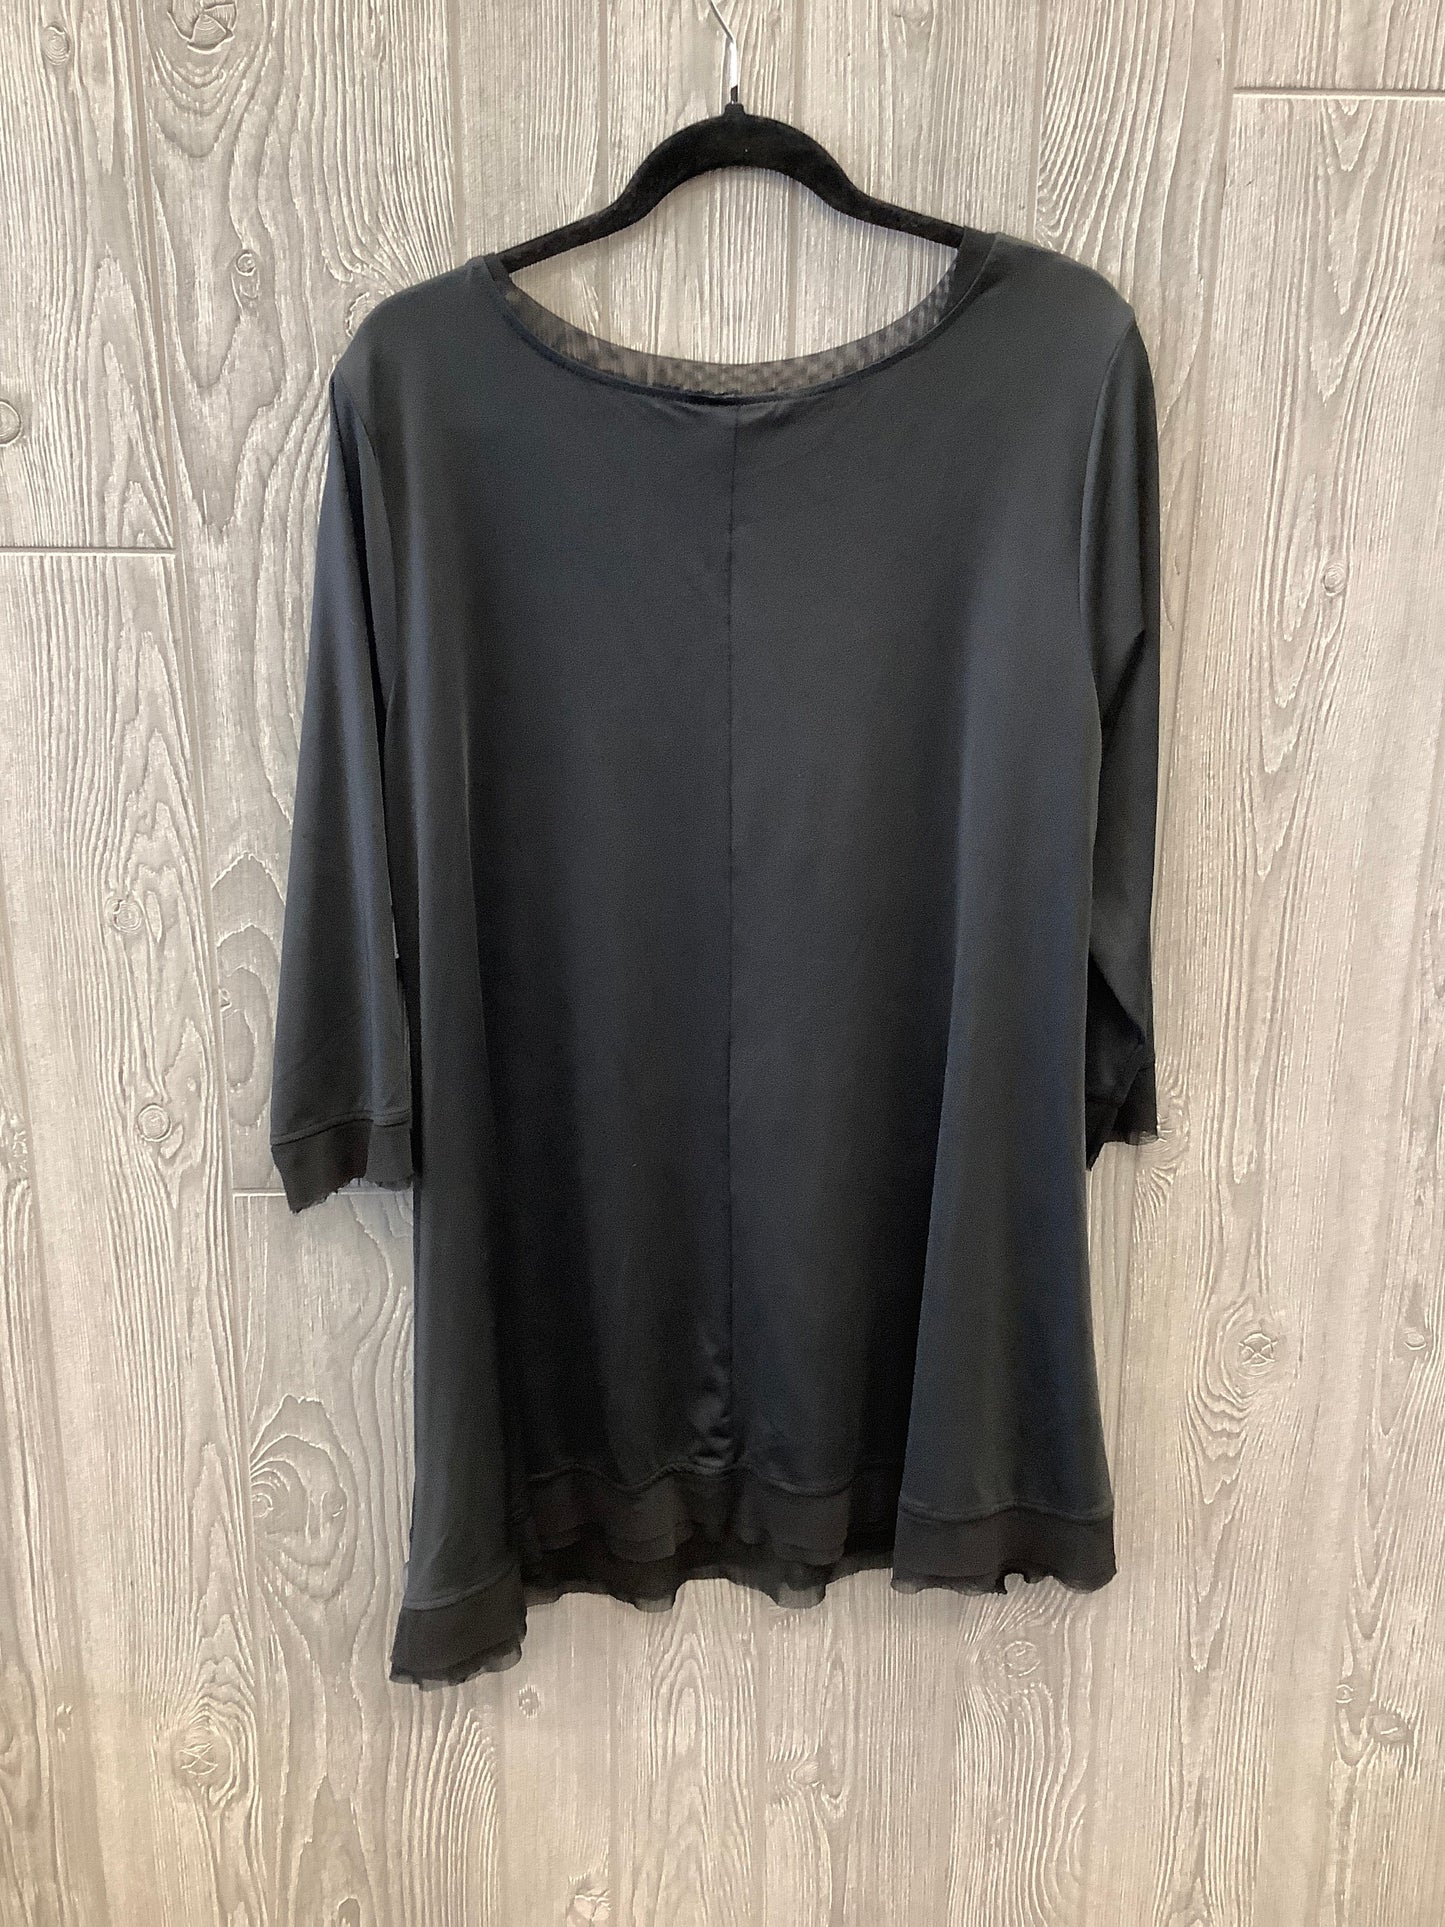 Black Top Long Sleeve Coco And Carmen, Size Xxl